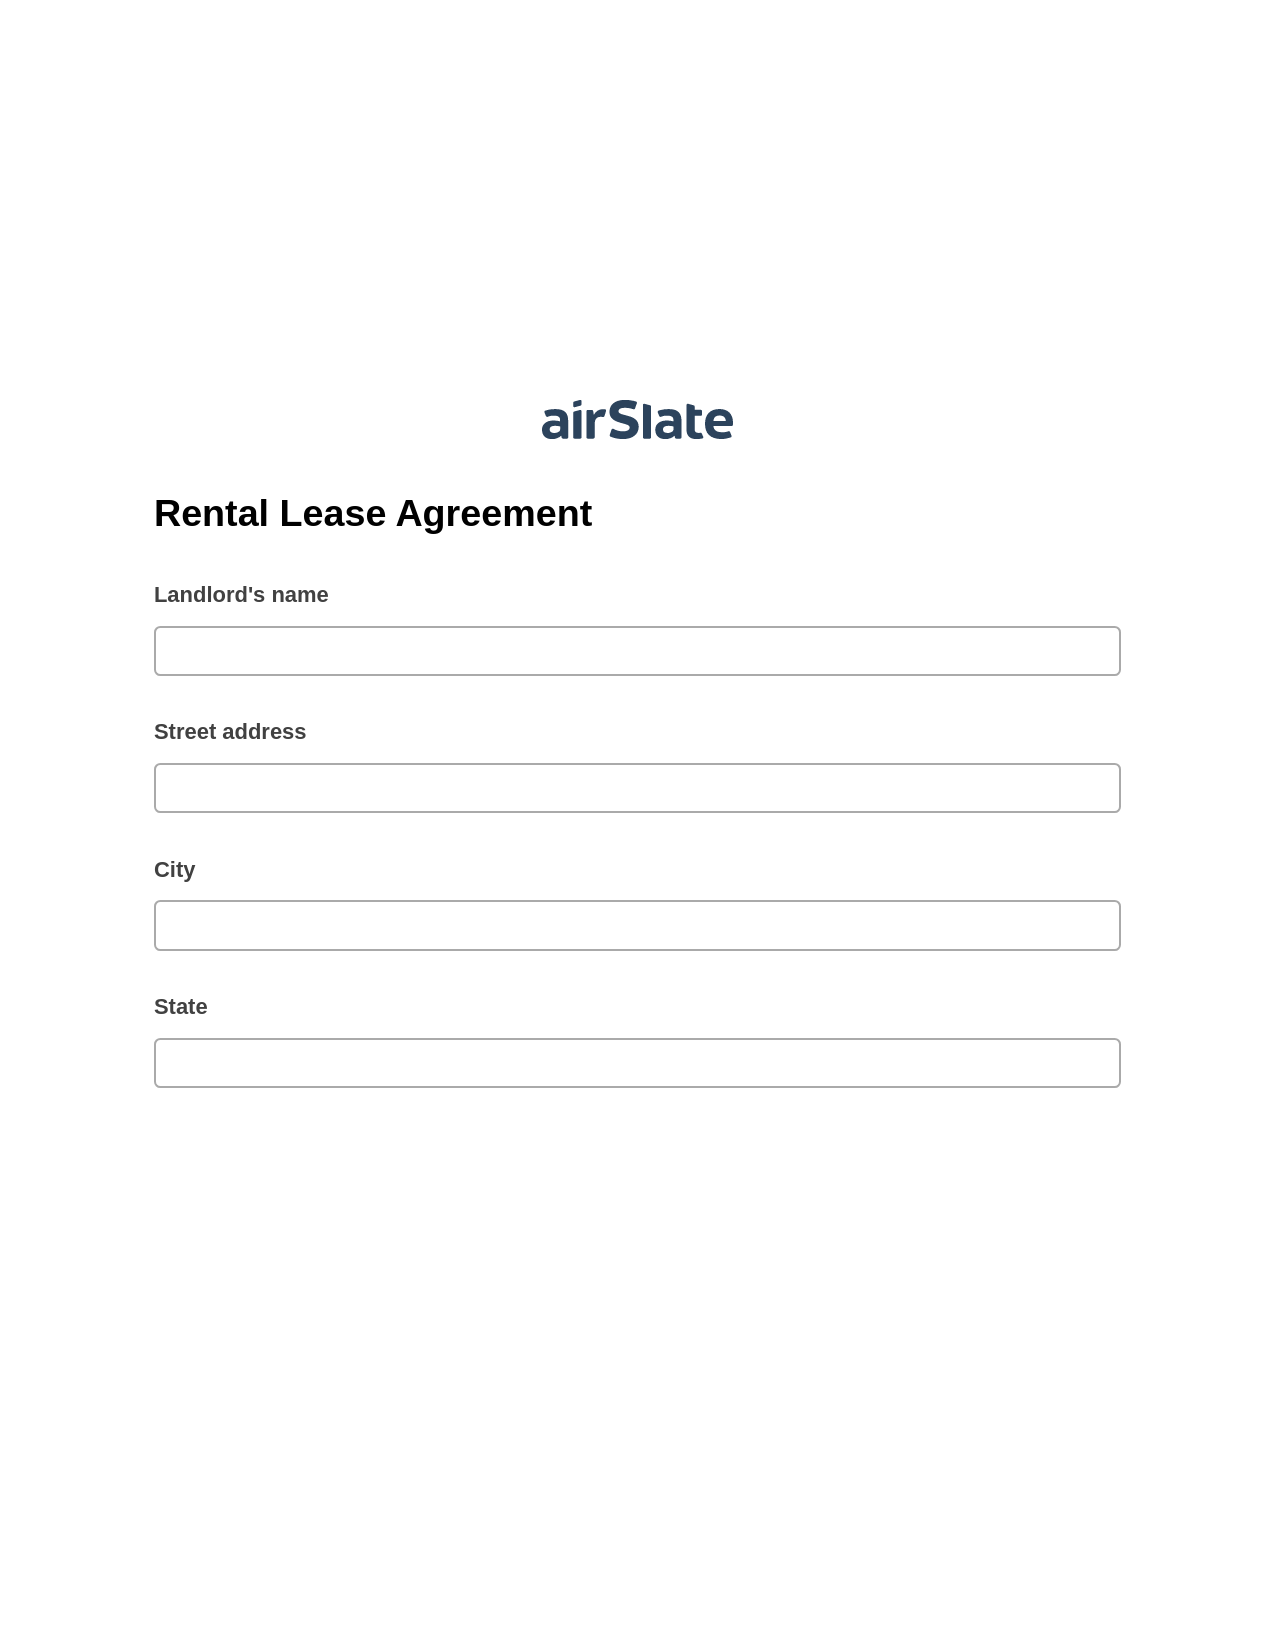 Multirole Rental Lease Agreement Pre-fill from Google Sheet Dropdown Options Bot, Send a Slate to Salesforce Contact Bot, Export to Salesforce Bot